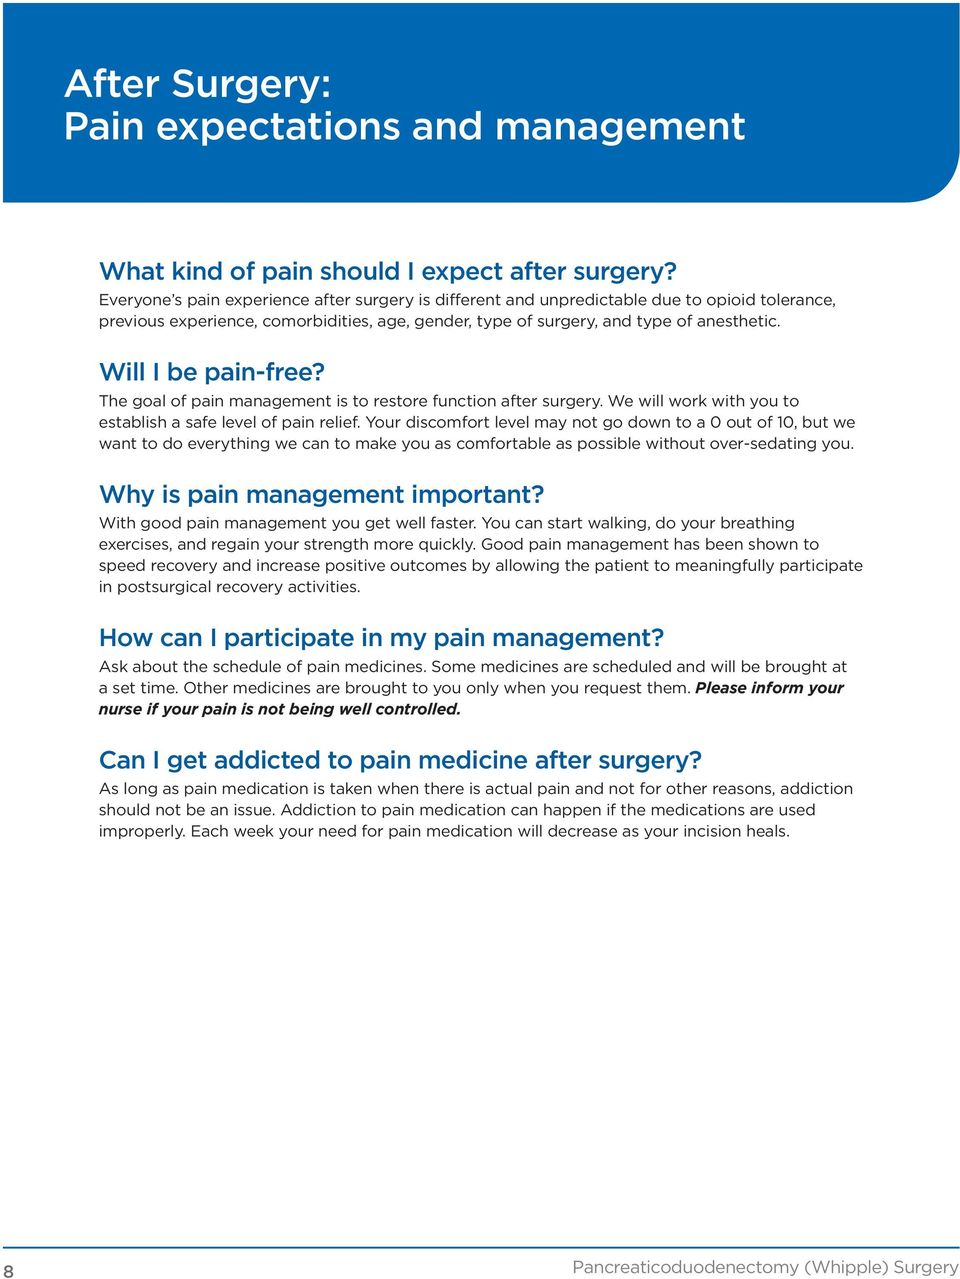 Will I be pain-free? The goal of pain management is to restore function after surgery. We will work with you to establish a safe level of pain relief.